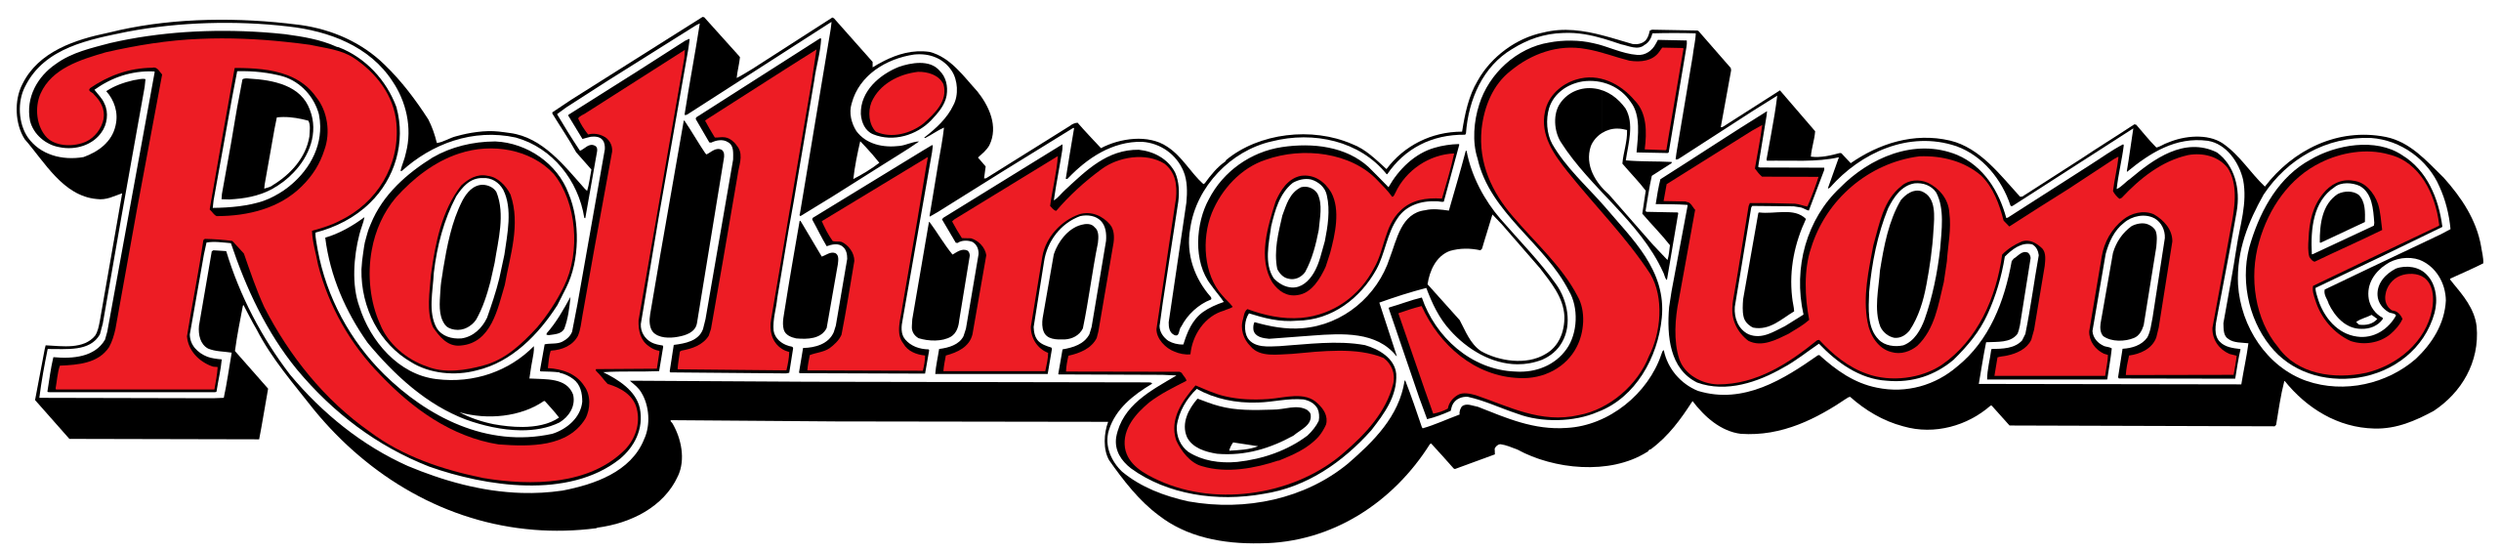 Rolling_Stone_logo.svg.png